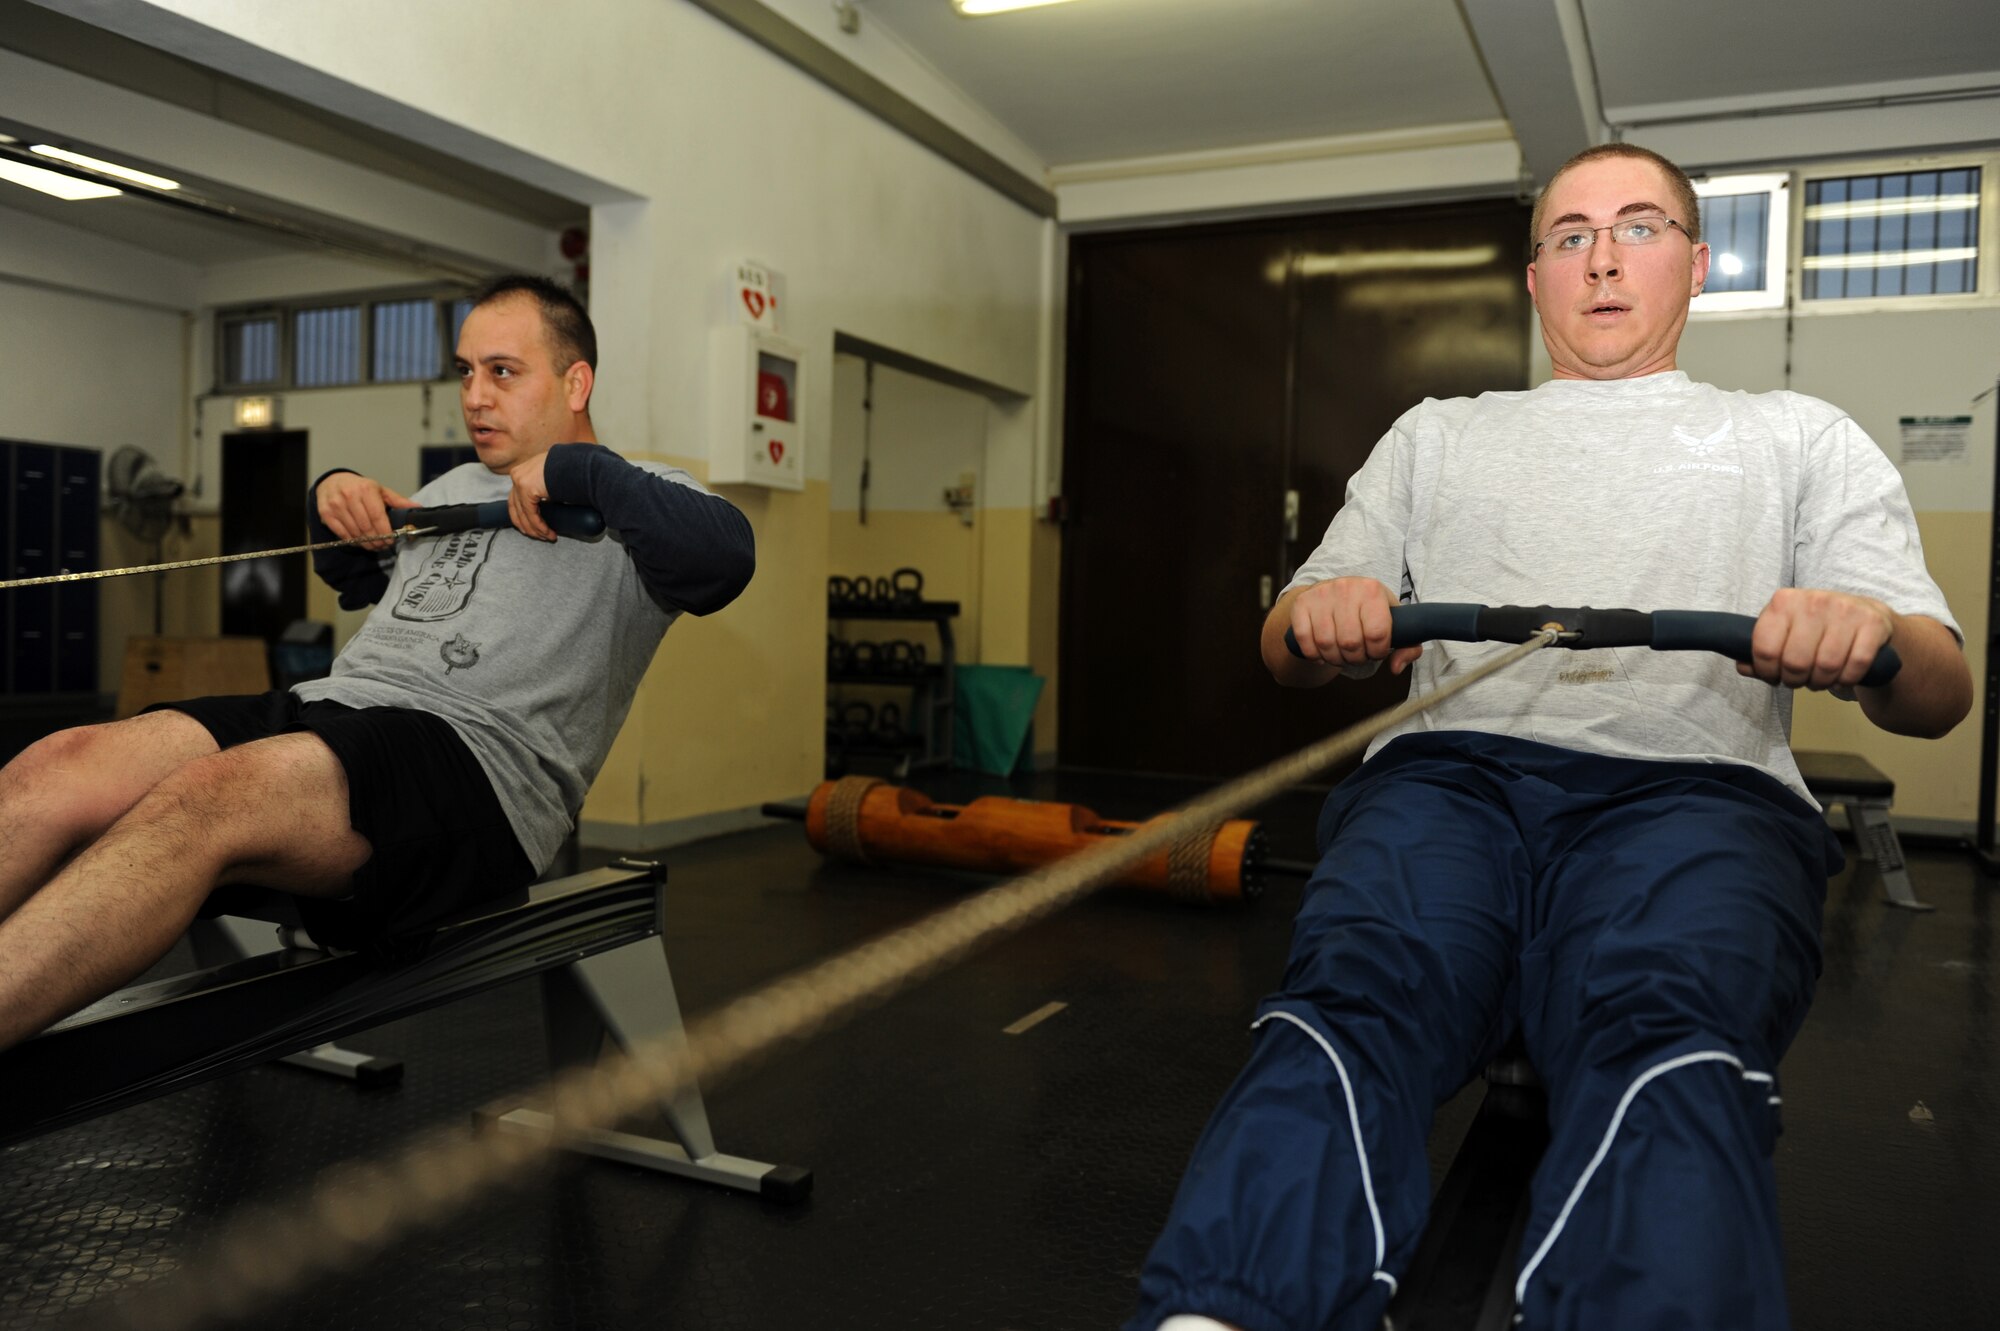 SPANGDAHLEM AIR BASE, Germany – Staff Sgt. David Gomez, left, 52nd Component Maintenance Squadron unit education and training manager, and Senior Airman Justin Blakeman, 52nd CMS aircraft fuels systems repair journeyman, use rowing machines during fitness training at the combat fitness facility here Nov. 30. Air Force Fitness Assessments continue throughout the winter season; however, the 1.5 mile run portion will consist of 22 laps inside the Skelton Memorial Fitness Center gymnasium on days when the temperature falls below 20 degrees Fahrenheit. (U.S. Air Force photo/Airman 1st Class Matthew B. Fredericks)